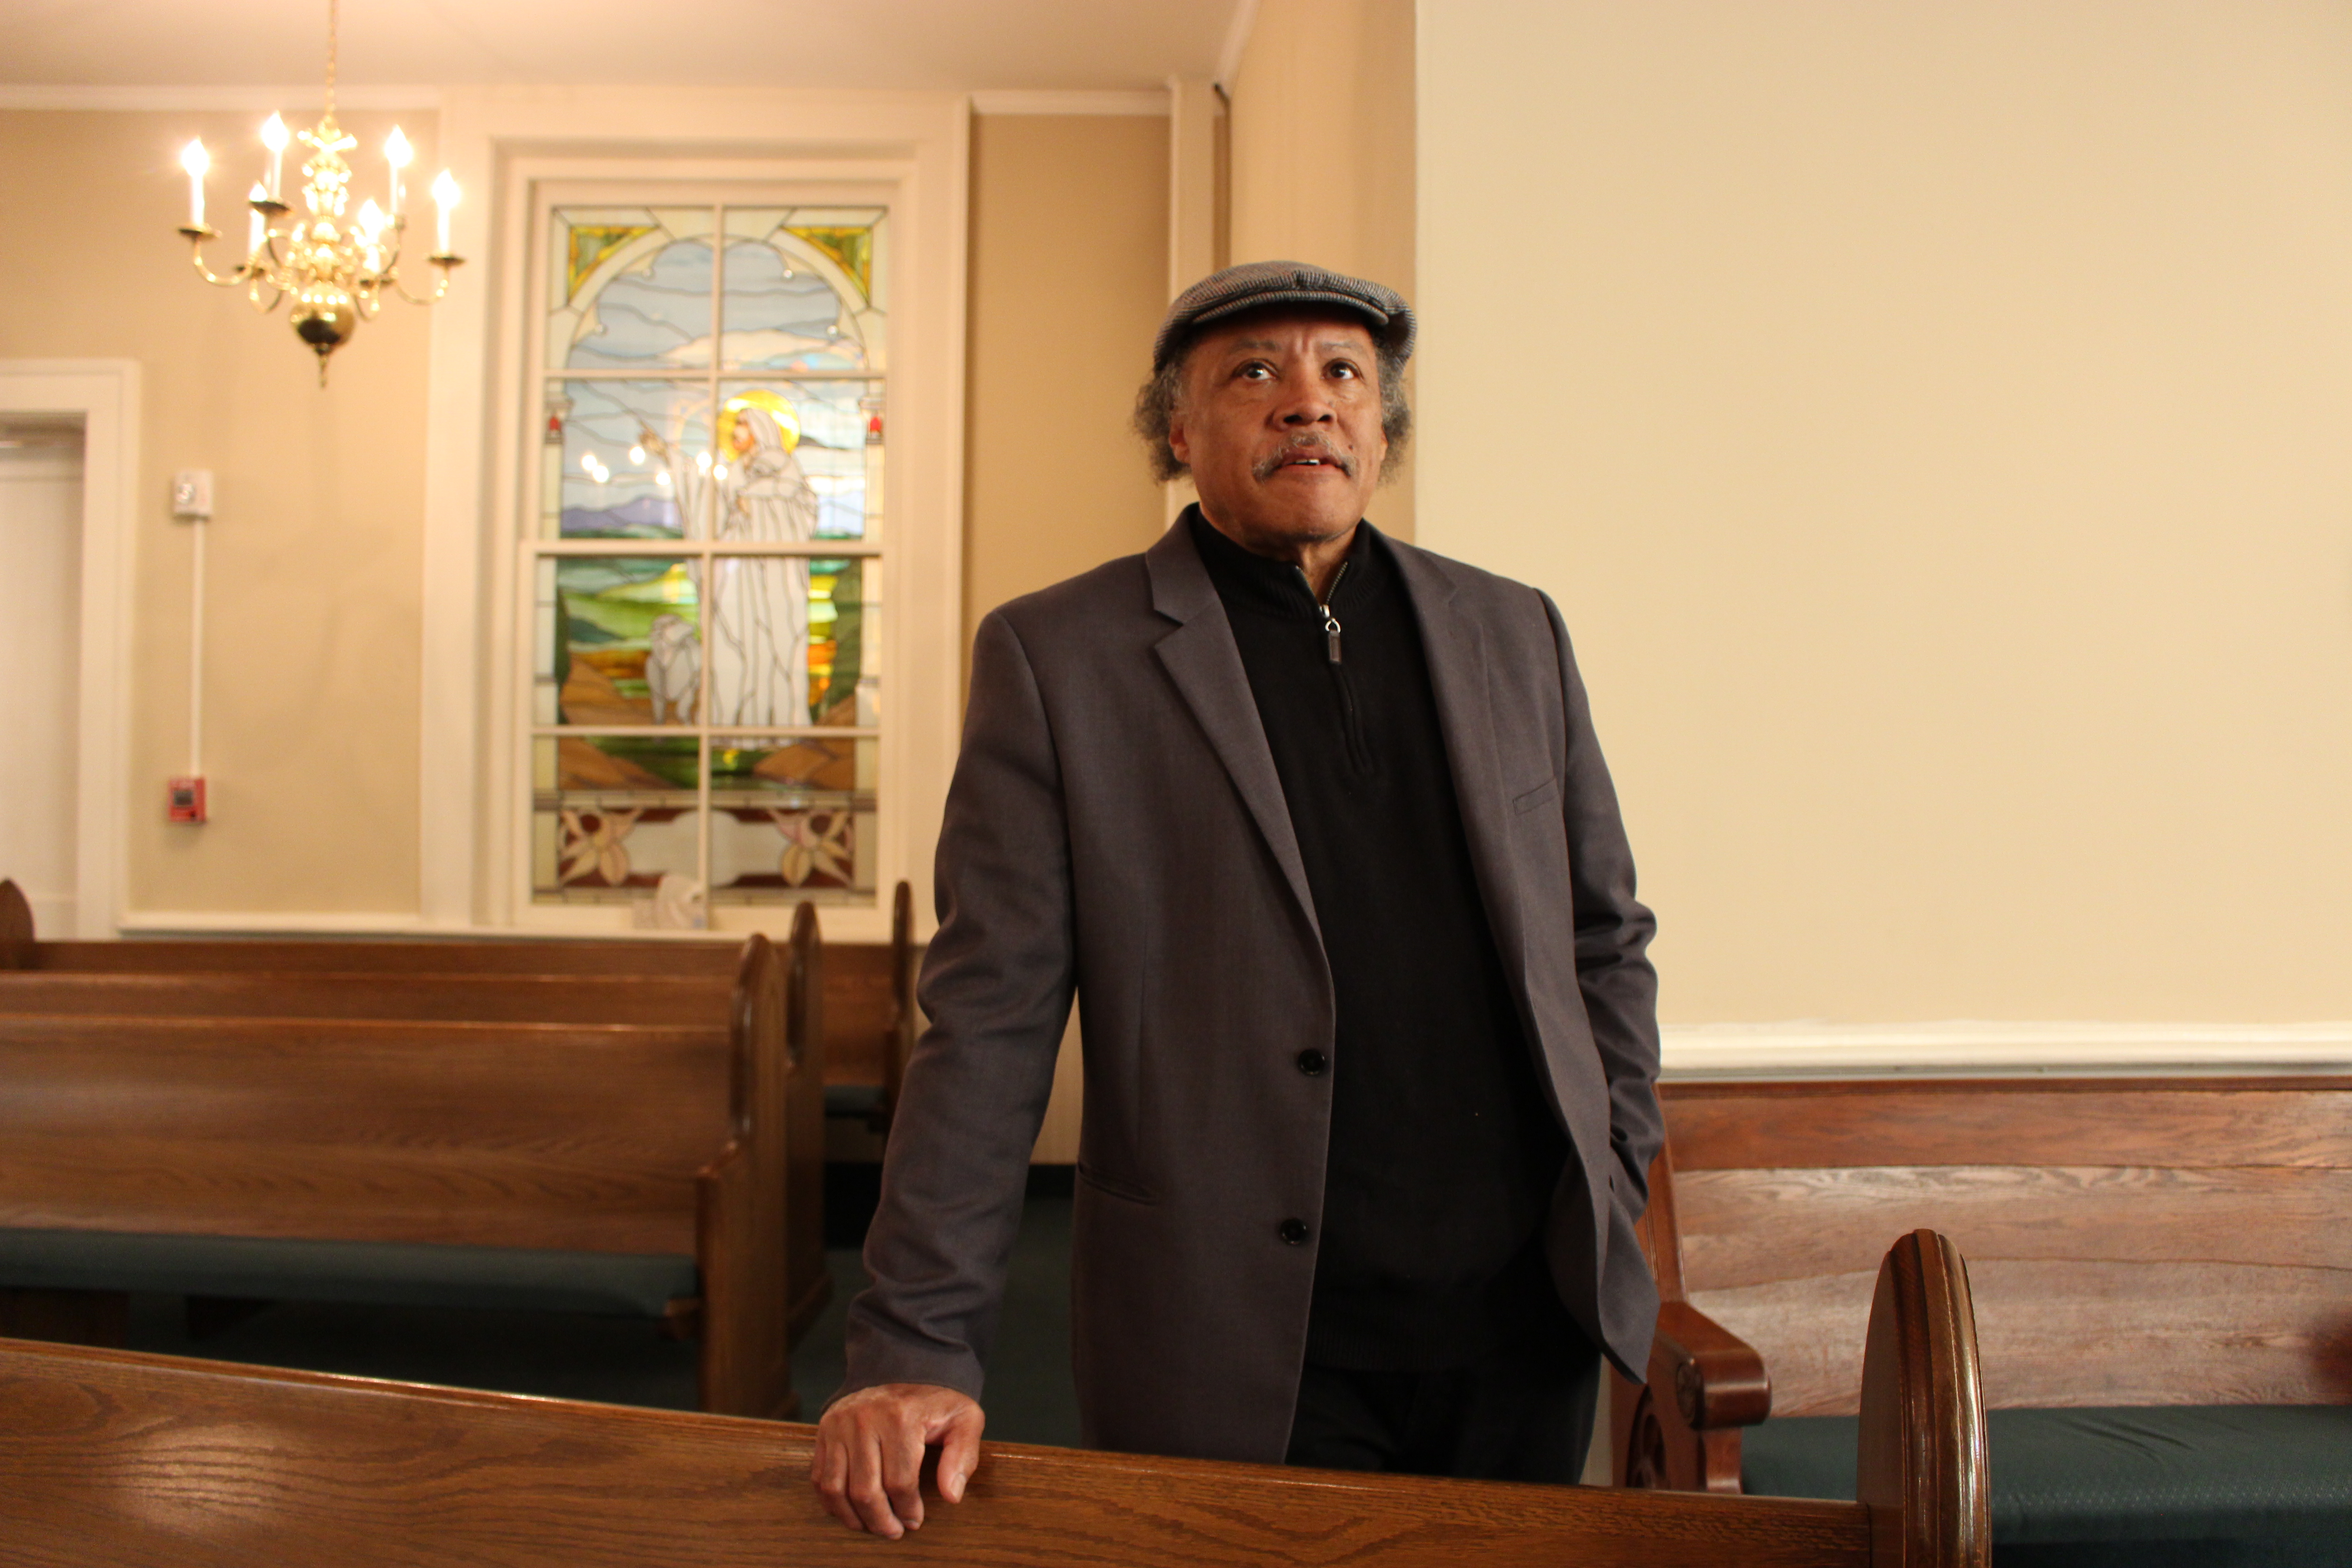 Elder Roy Harris stands in his church, Mt Zion Missionary Baptist Church for a portrait. He rests his right hand on a pew and looks beyond the camera towards the front of the worship hall. He is wearing a grey suit, black sweater, and a grey flat cap hat.